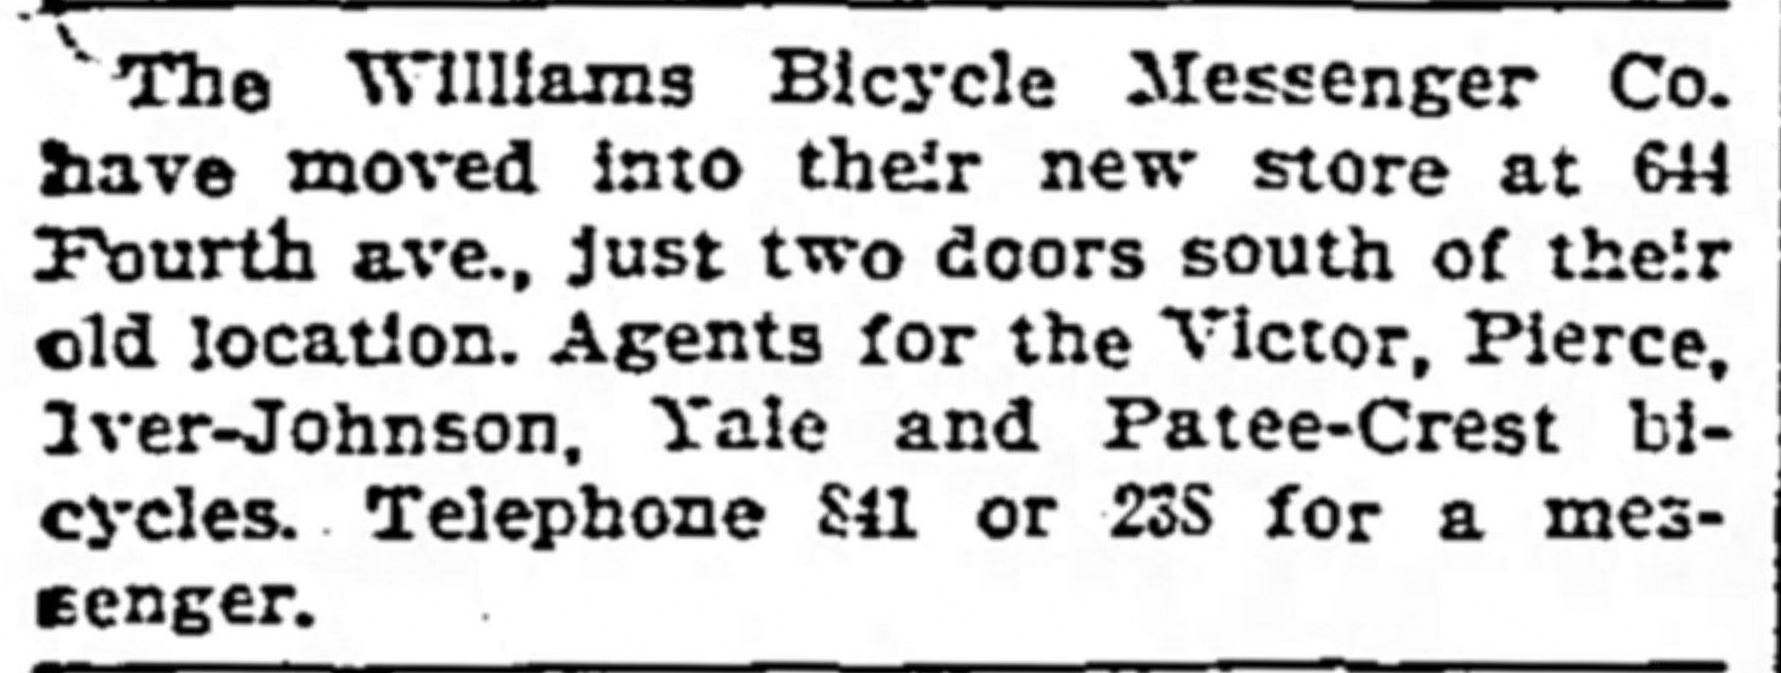 Williams-Bicycle-Messenger-Company-Louisville-Kentucky-1889-velo-Fahrrad-charges-paid-City-Directory